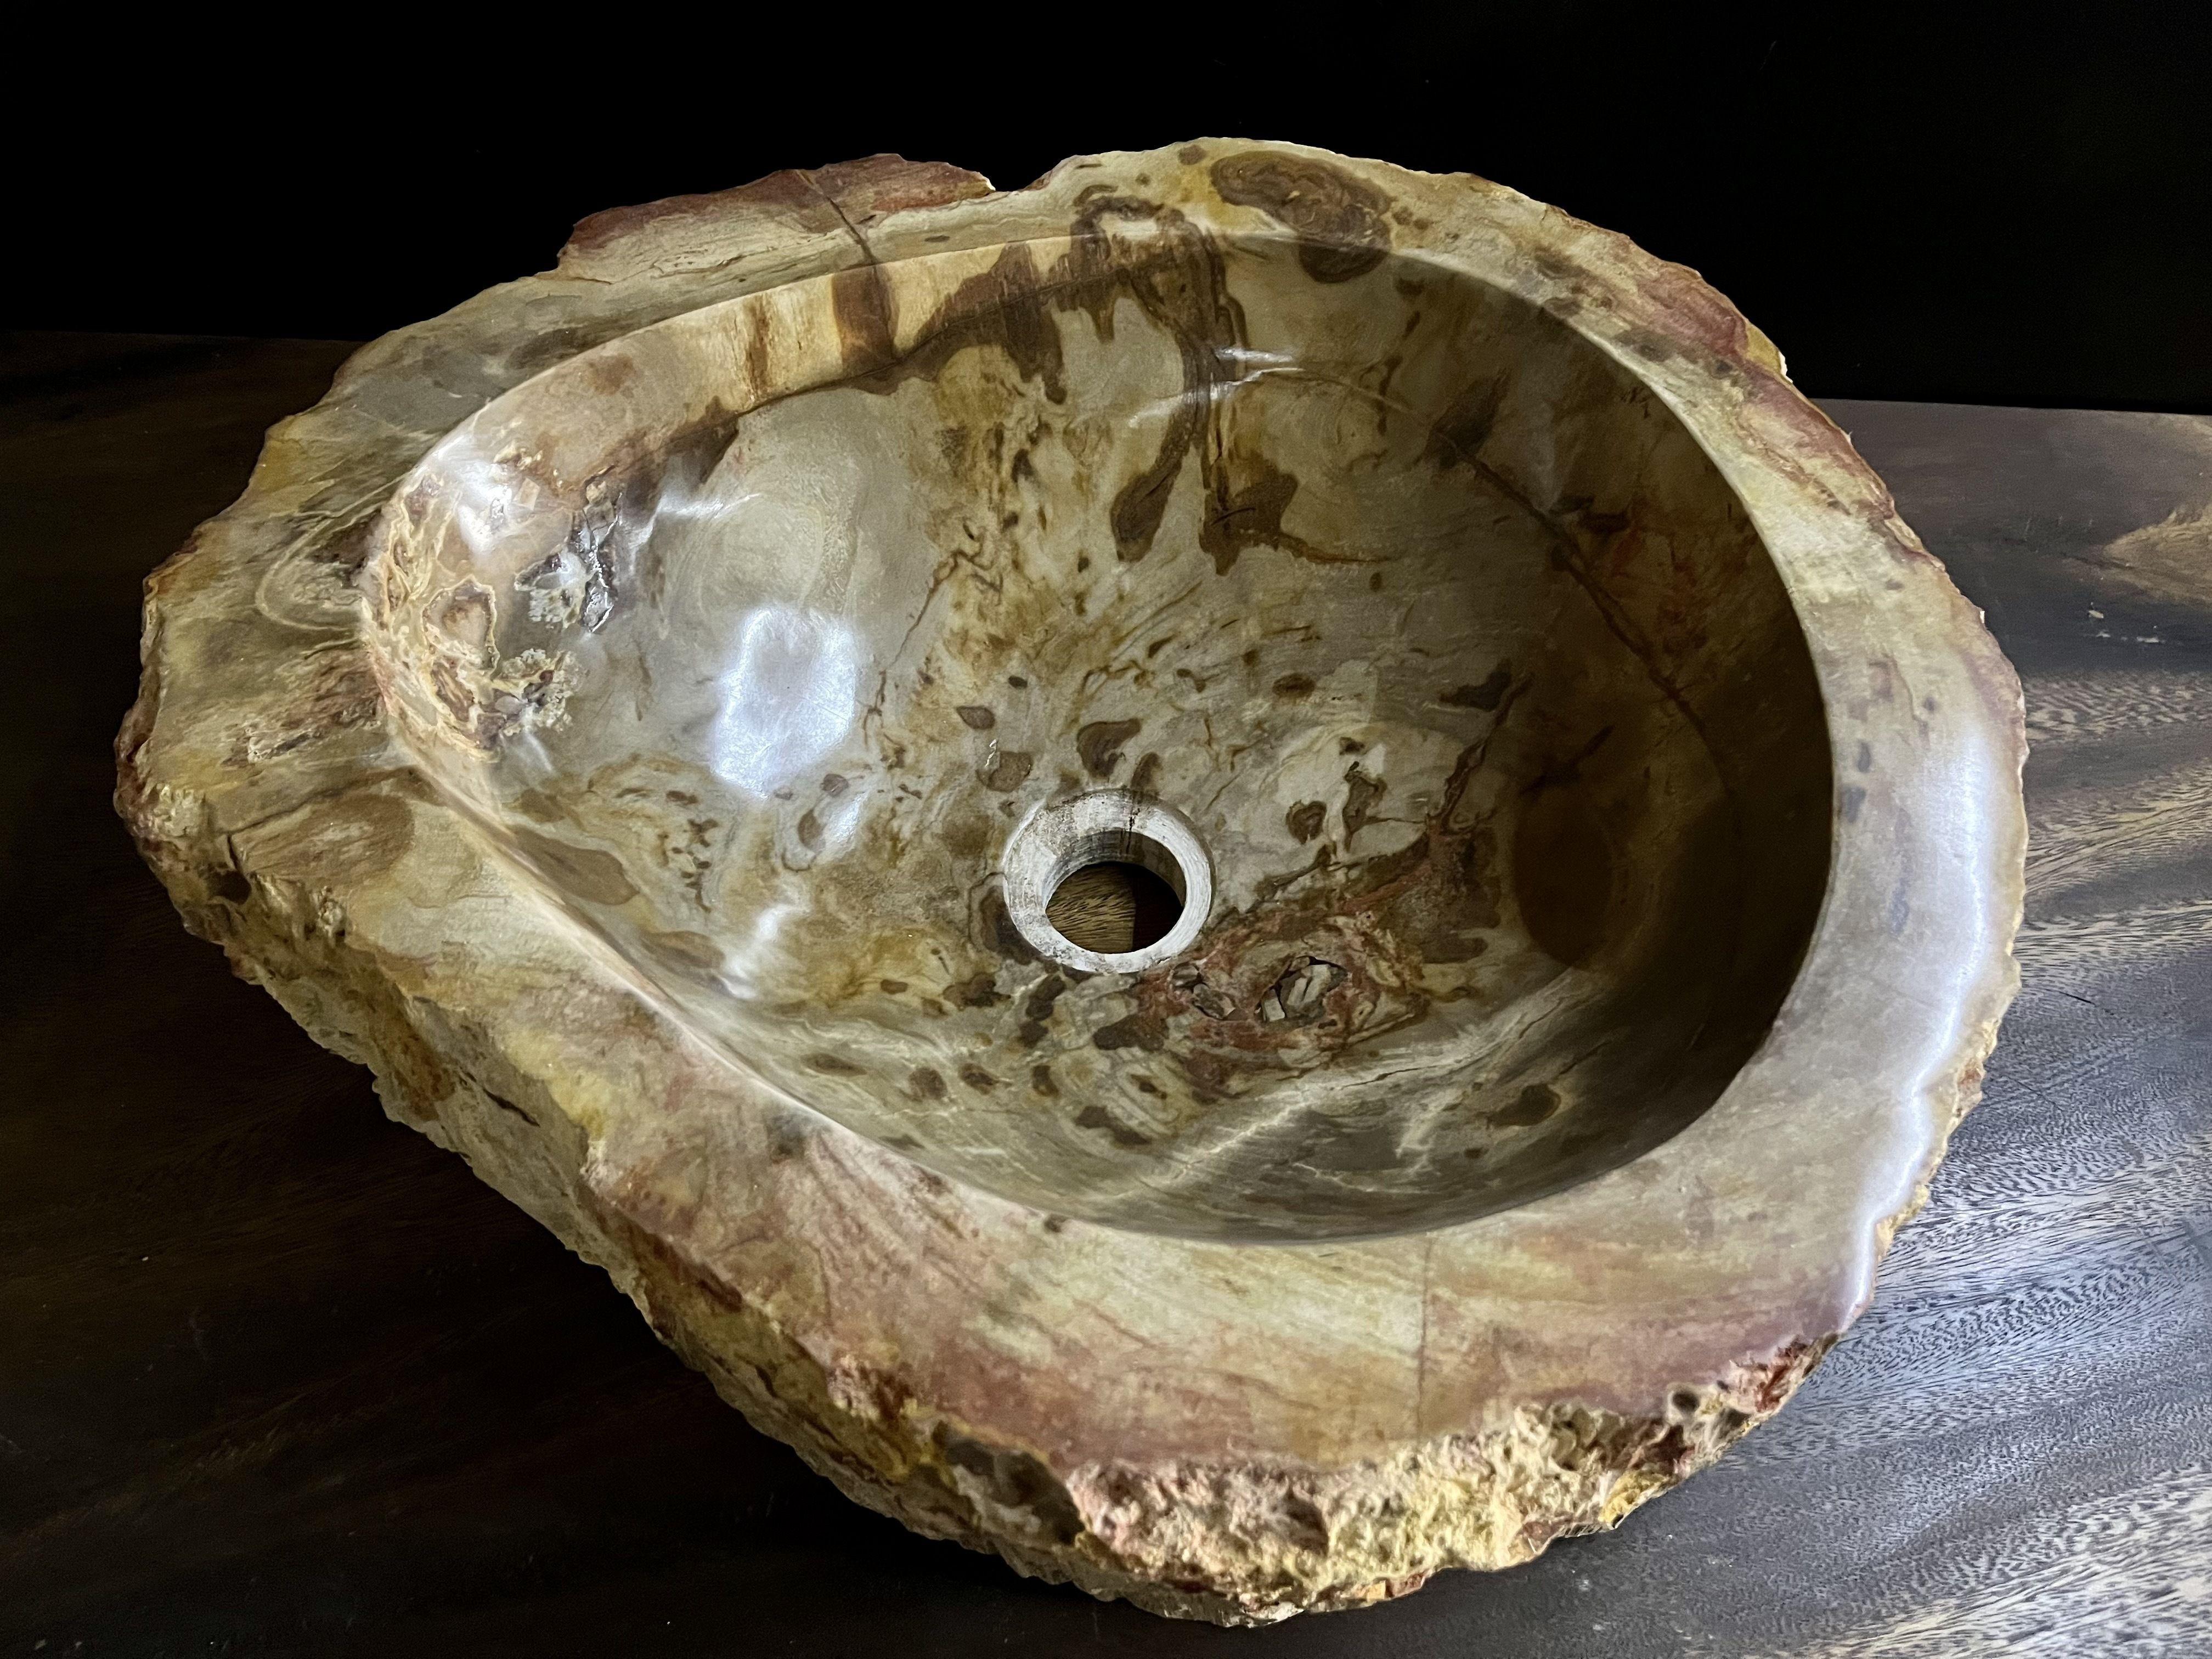 Contemporary Petrified Wood Sink Brown/ Beige/ Red Tones Polished Top Quality For Sale